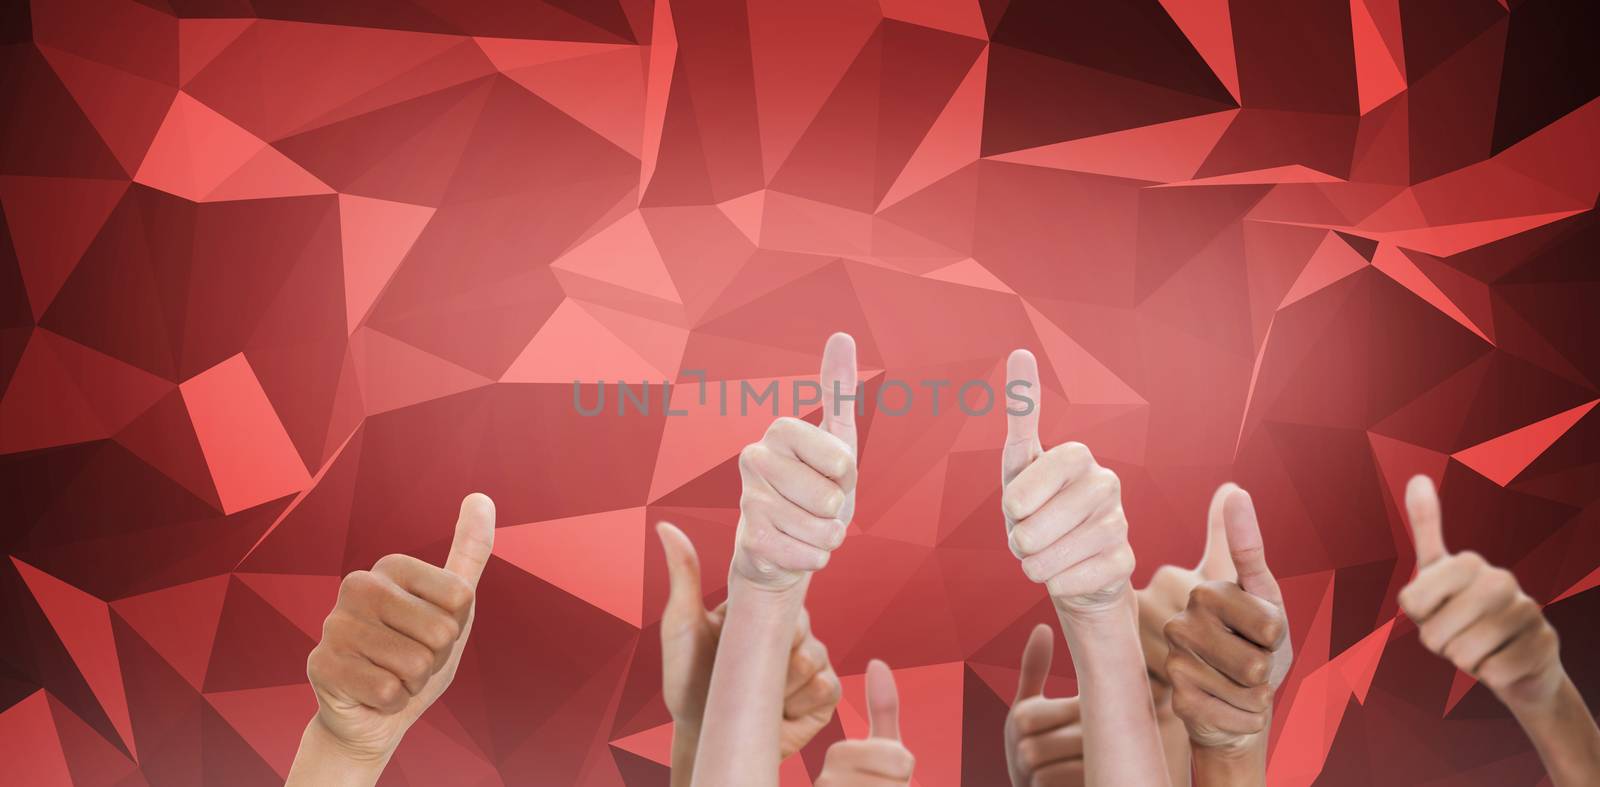 Thumbsup against red abstract design